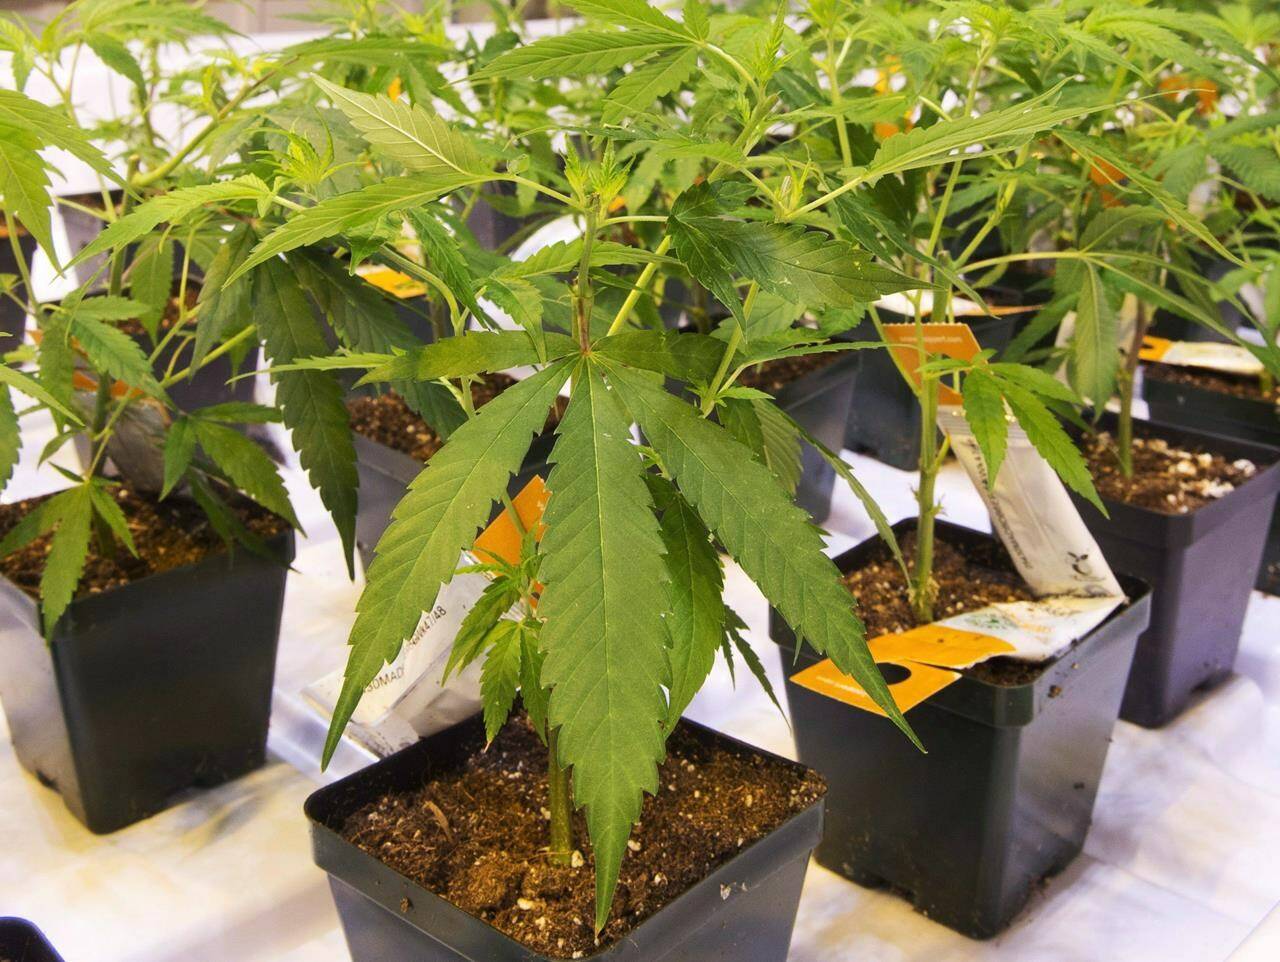 Aurora Cannabis to raise $33.8M in share offering, plans to repay convertible debt